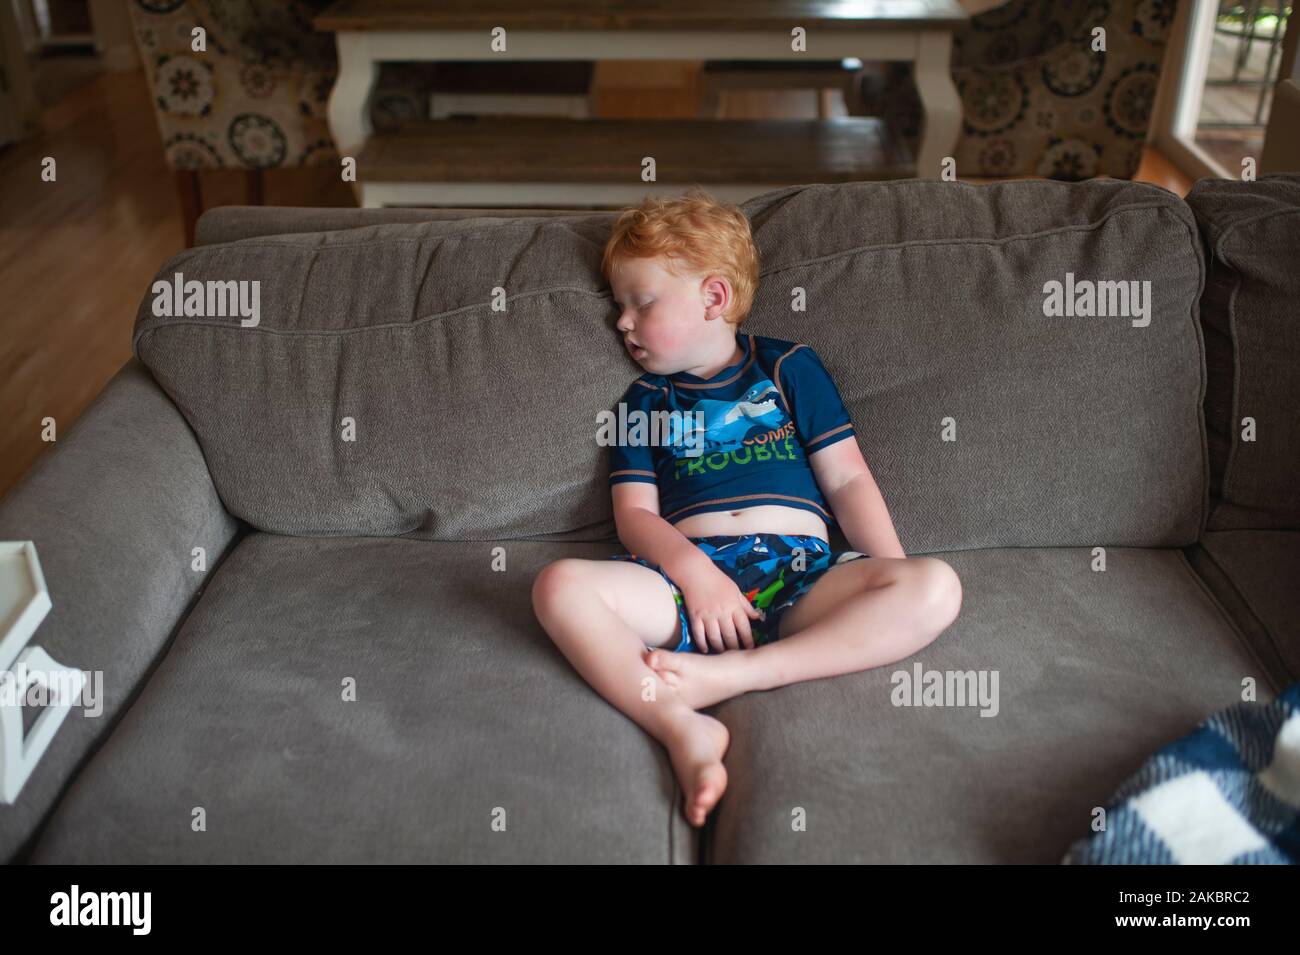 exhausted toddler boy 2-3 years old asleep sitting up on couch at home Stock Photo